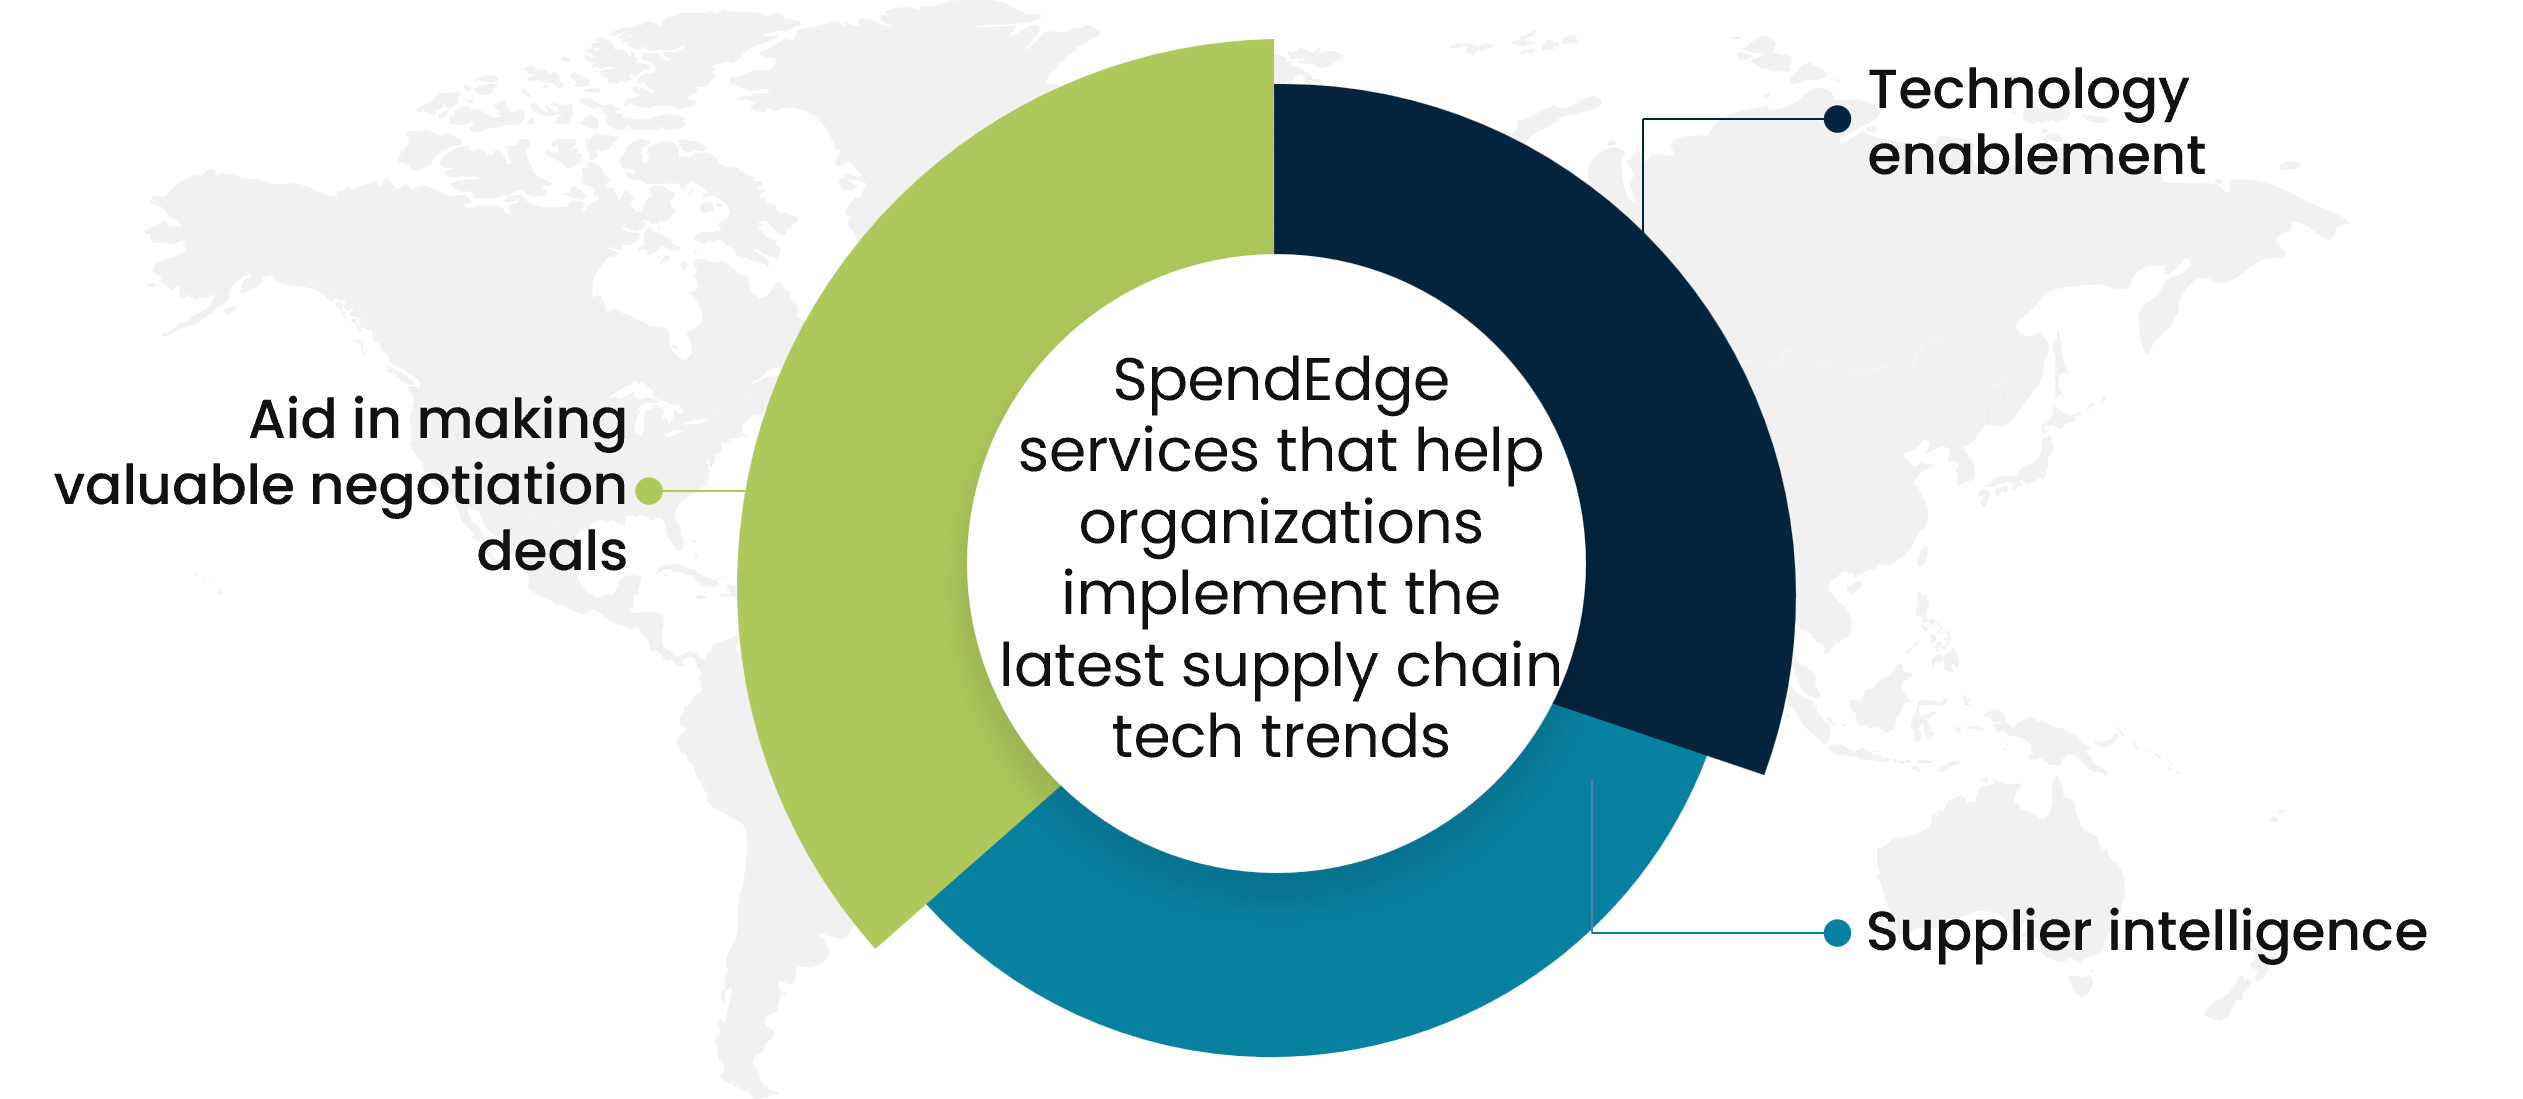 SpendEdge services that help organizations implement the latest supply chain tech trends